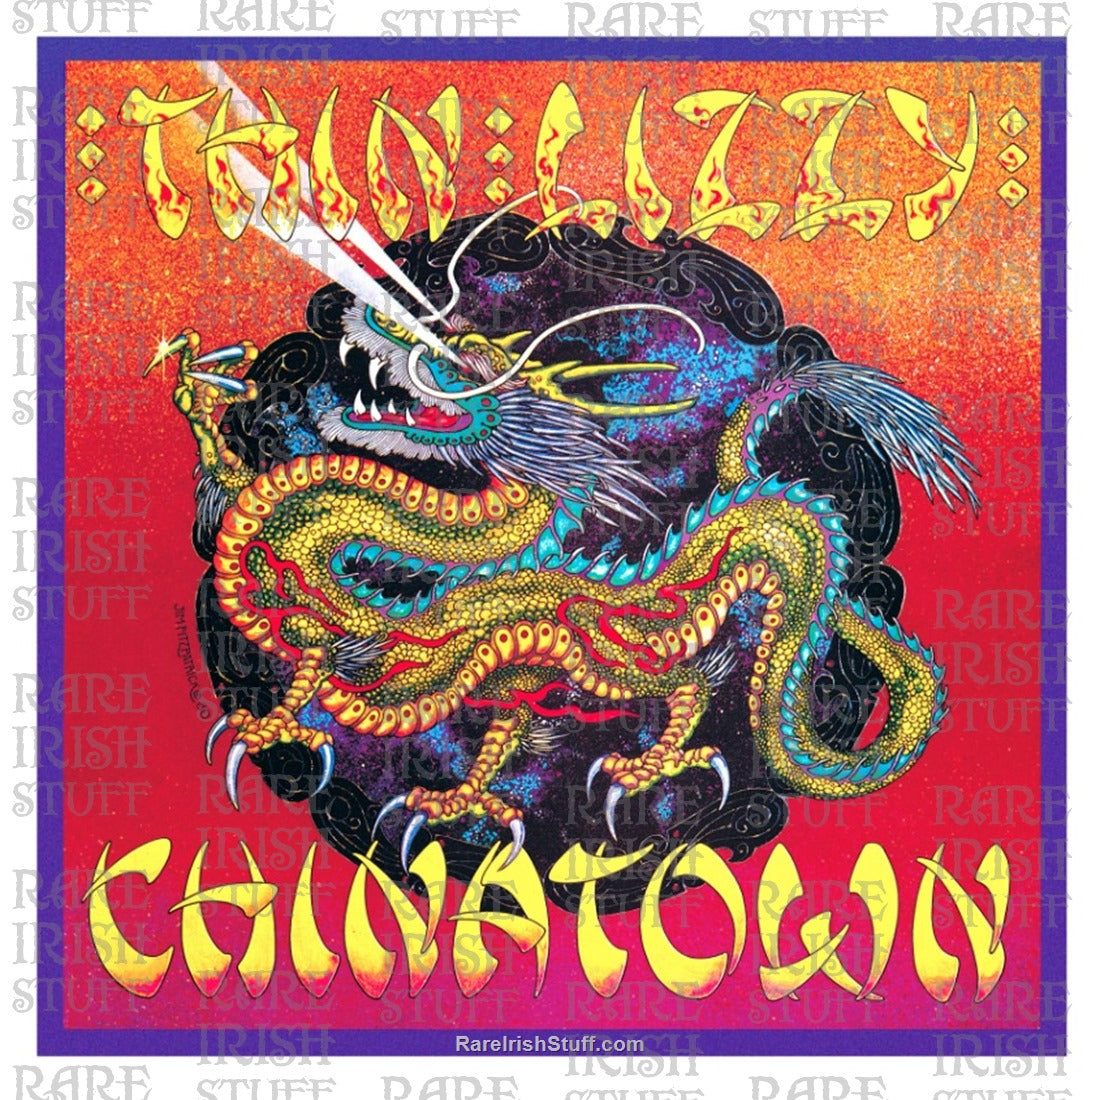 Chinatown album cover by Jim Fitzpatrick 1980